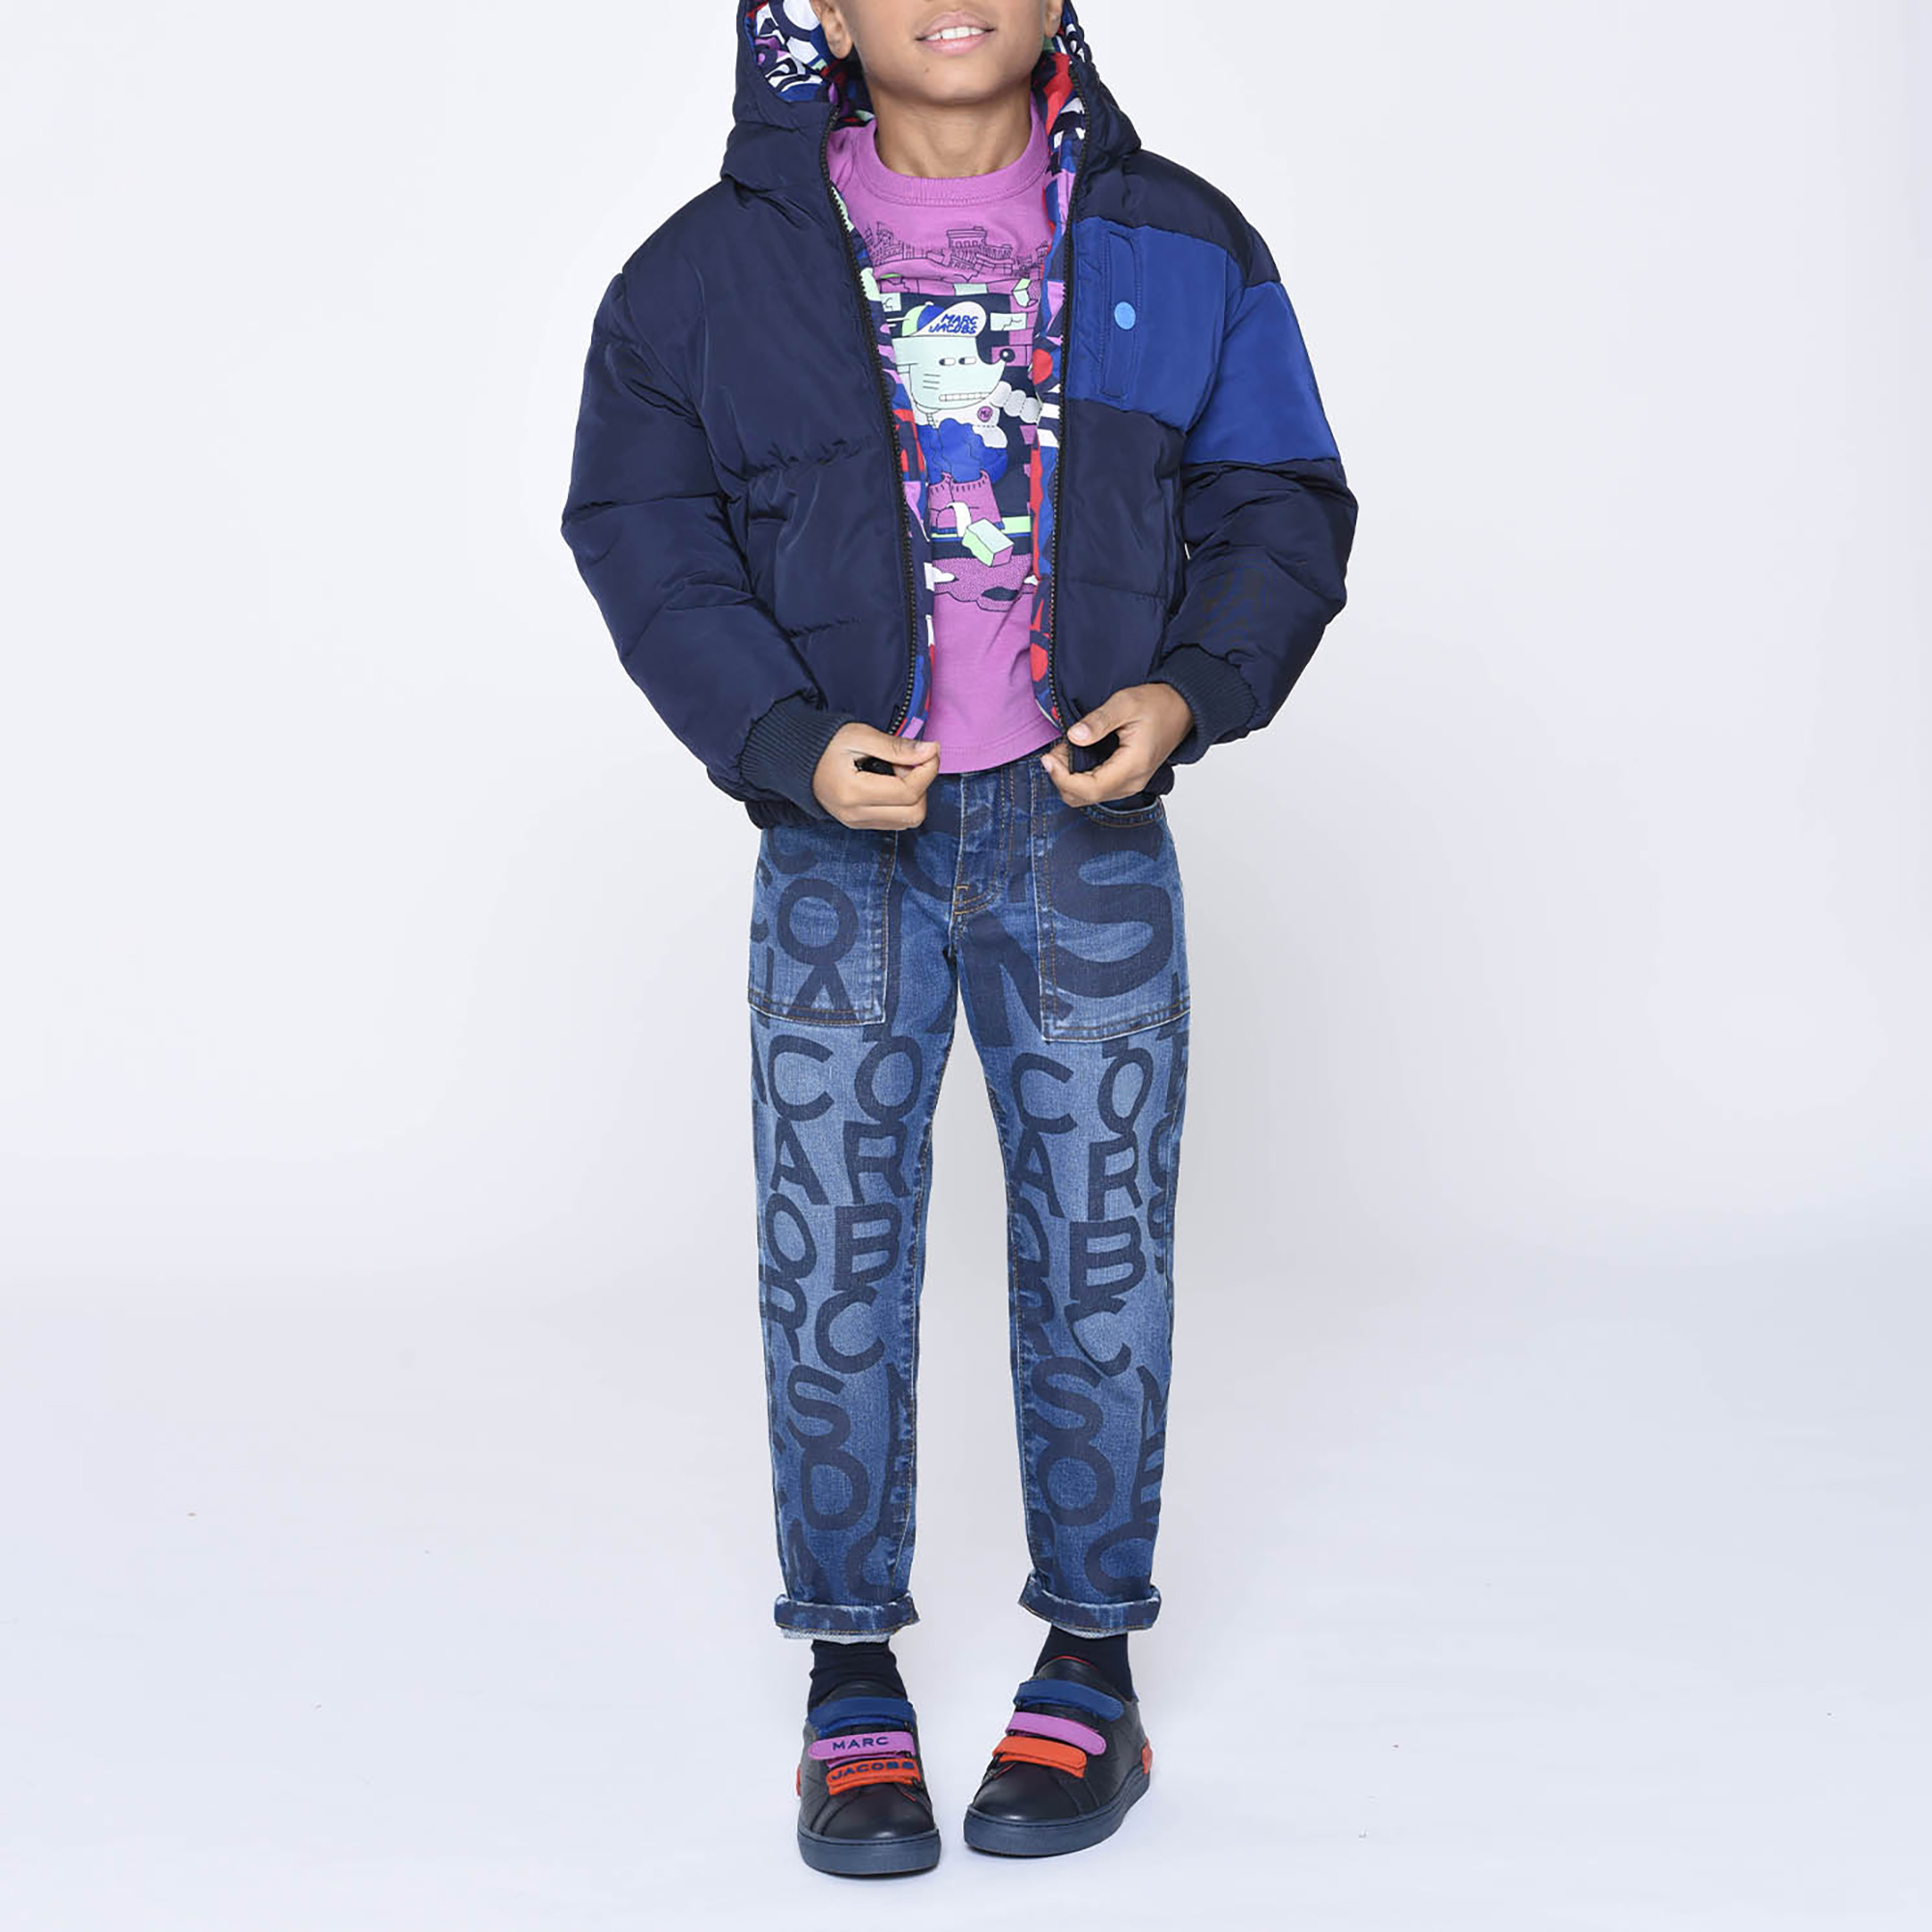 5-pocket printed jeans MARC JACOBS for BOY